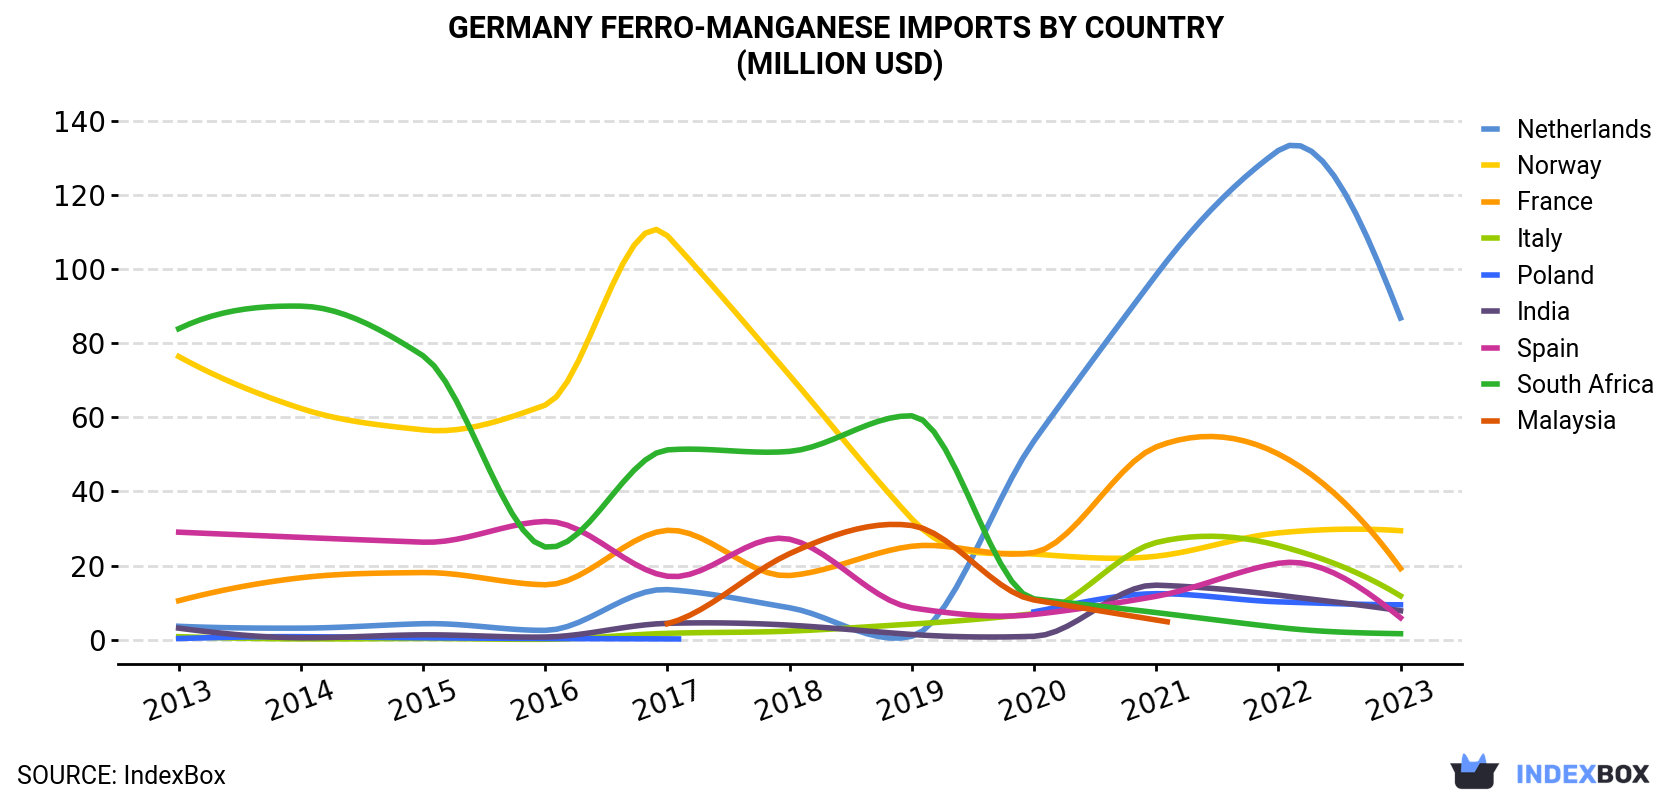 Germany Ferro-Manganese Imports By Country (Million USD)